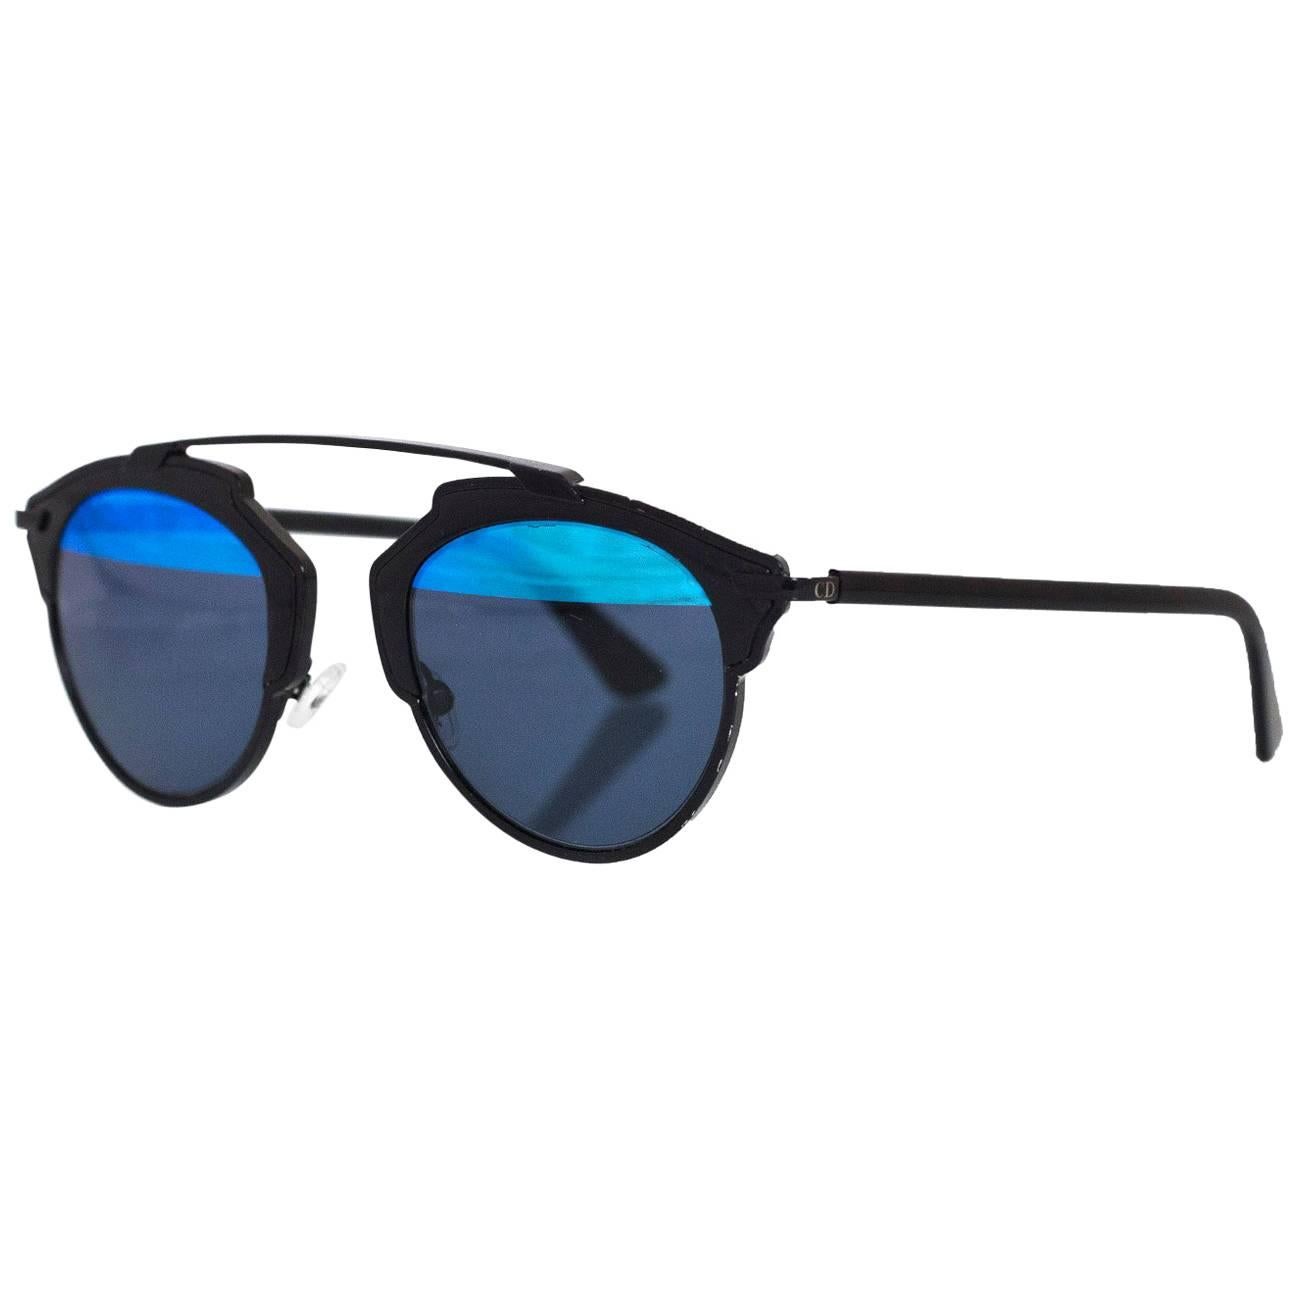 Christian Dior Black & Blue So Real Sunglasses with Case